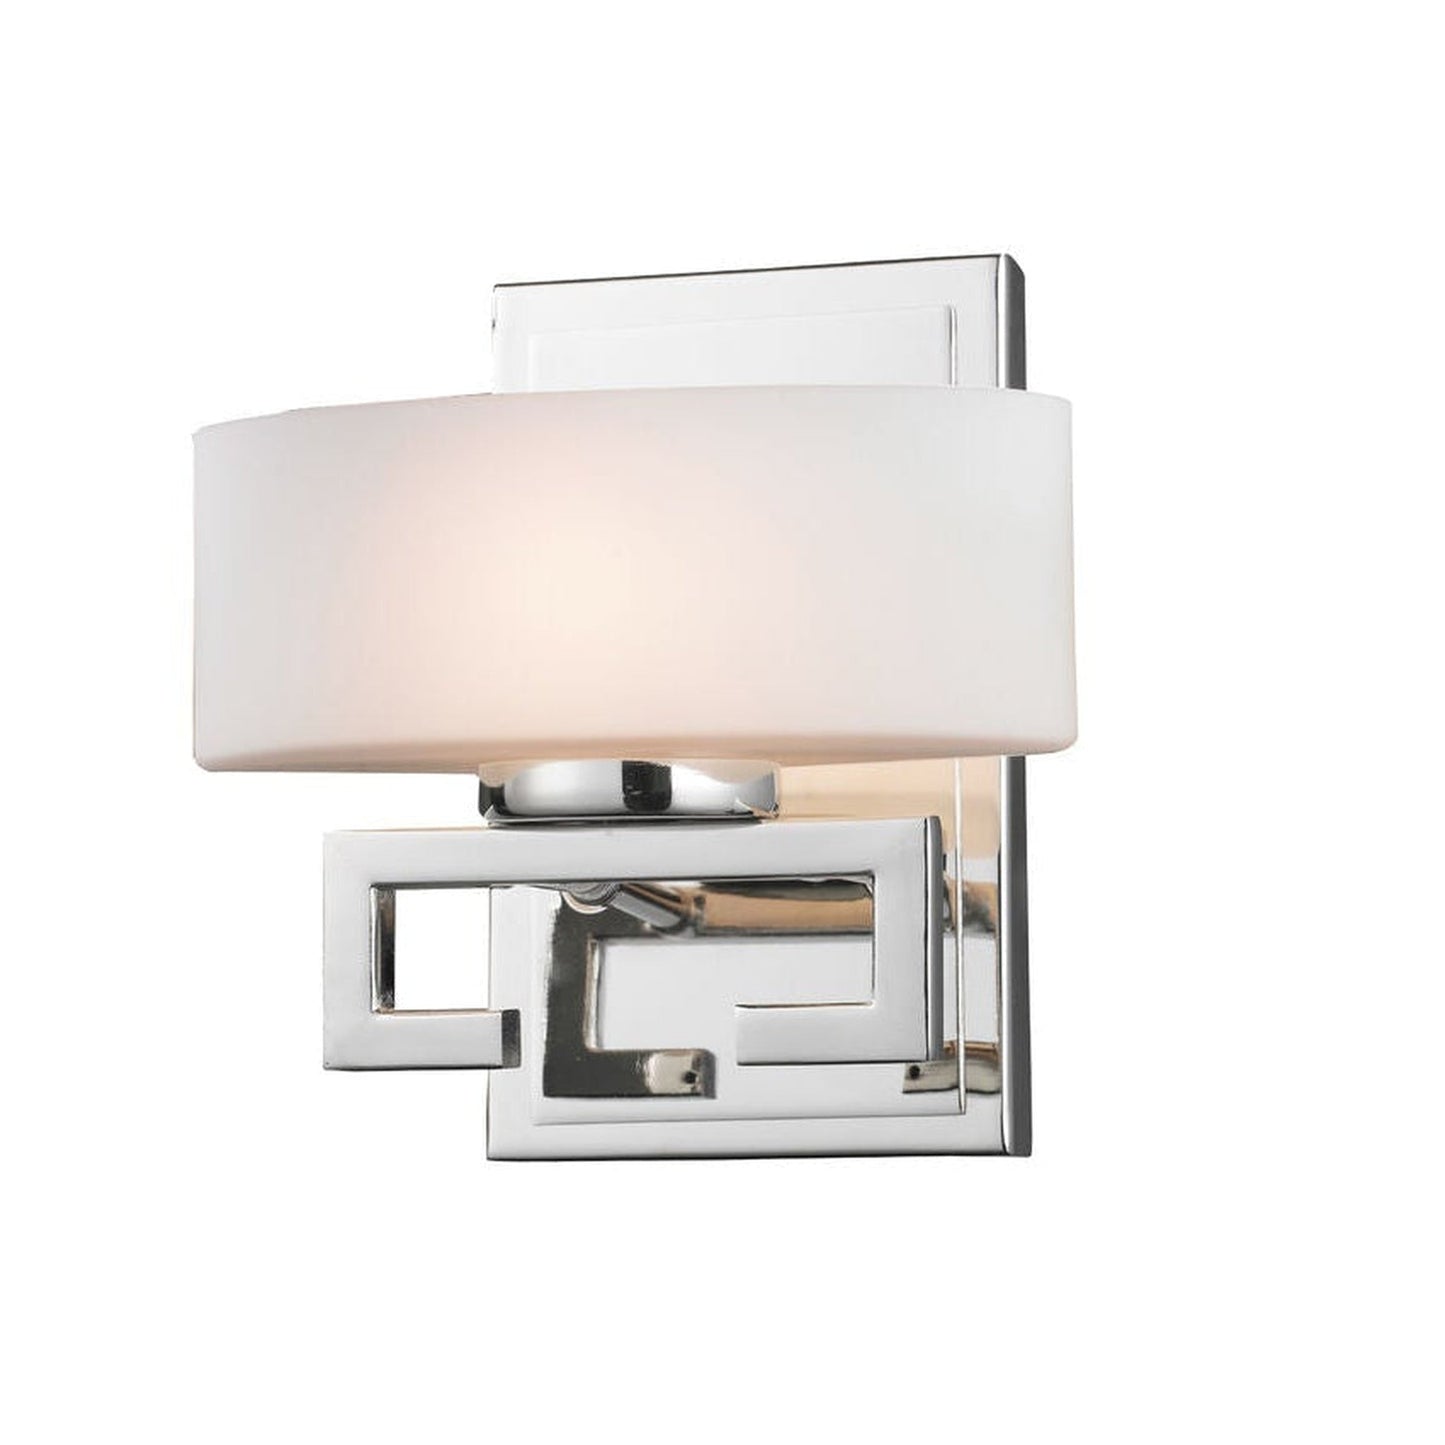 Z-Lite Cetynia 8" 1-Light LED Chrome Vanity Light With Matte Opal Shade